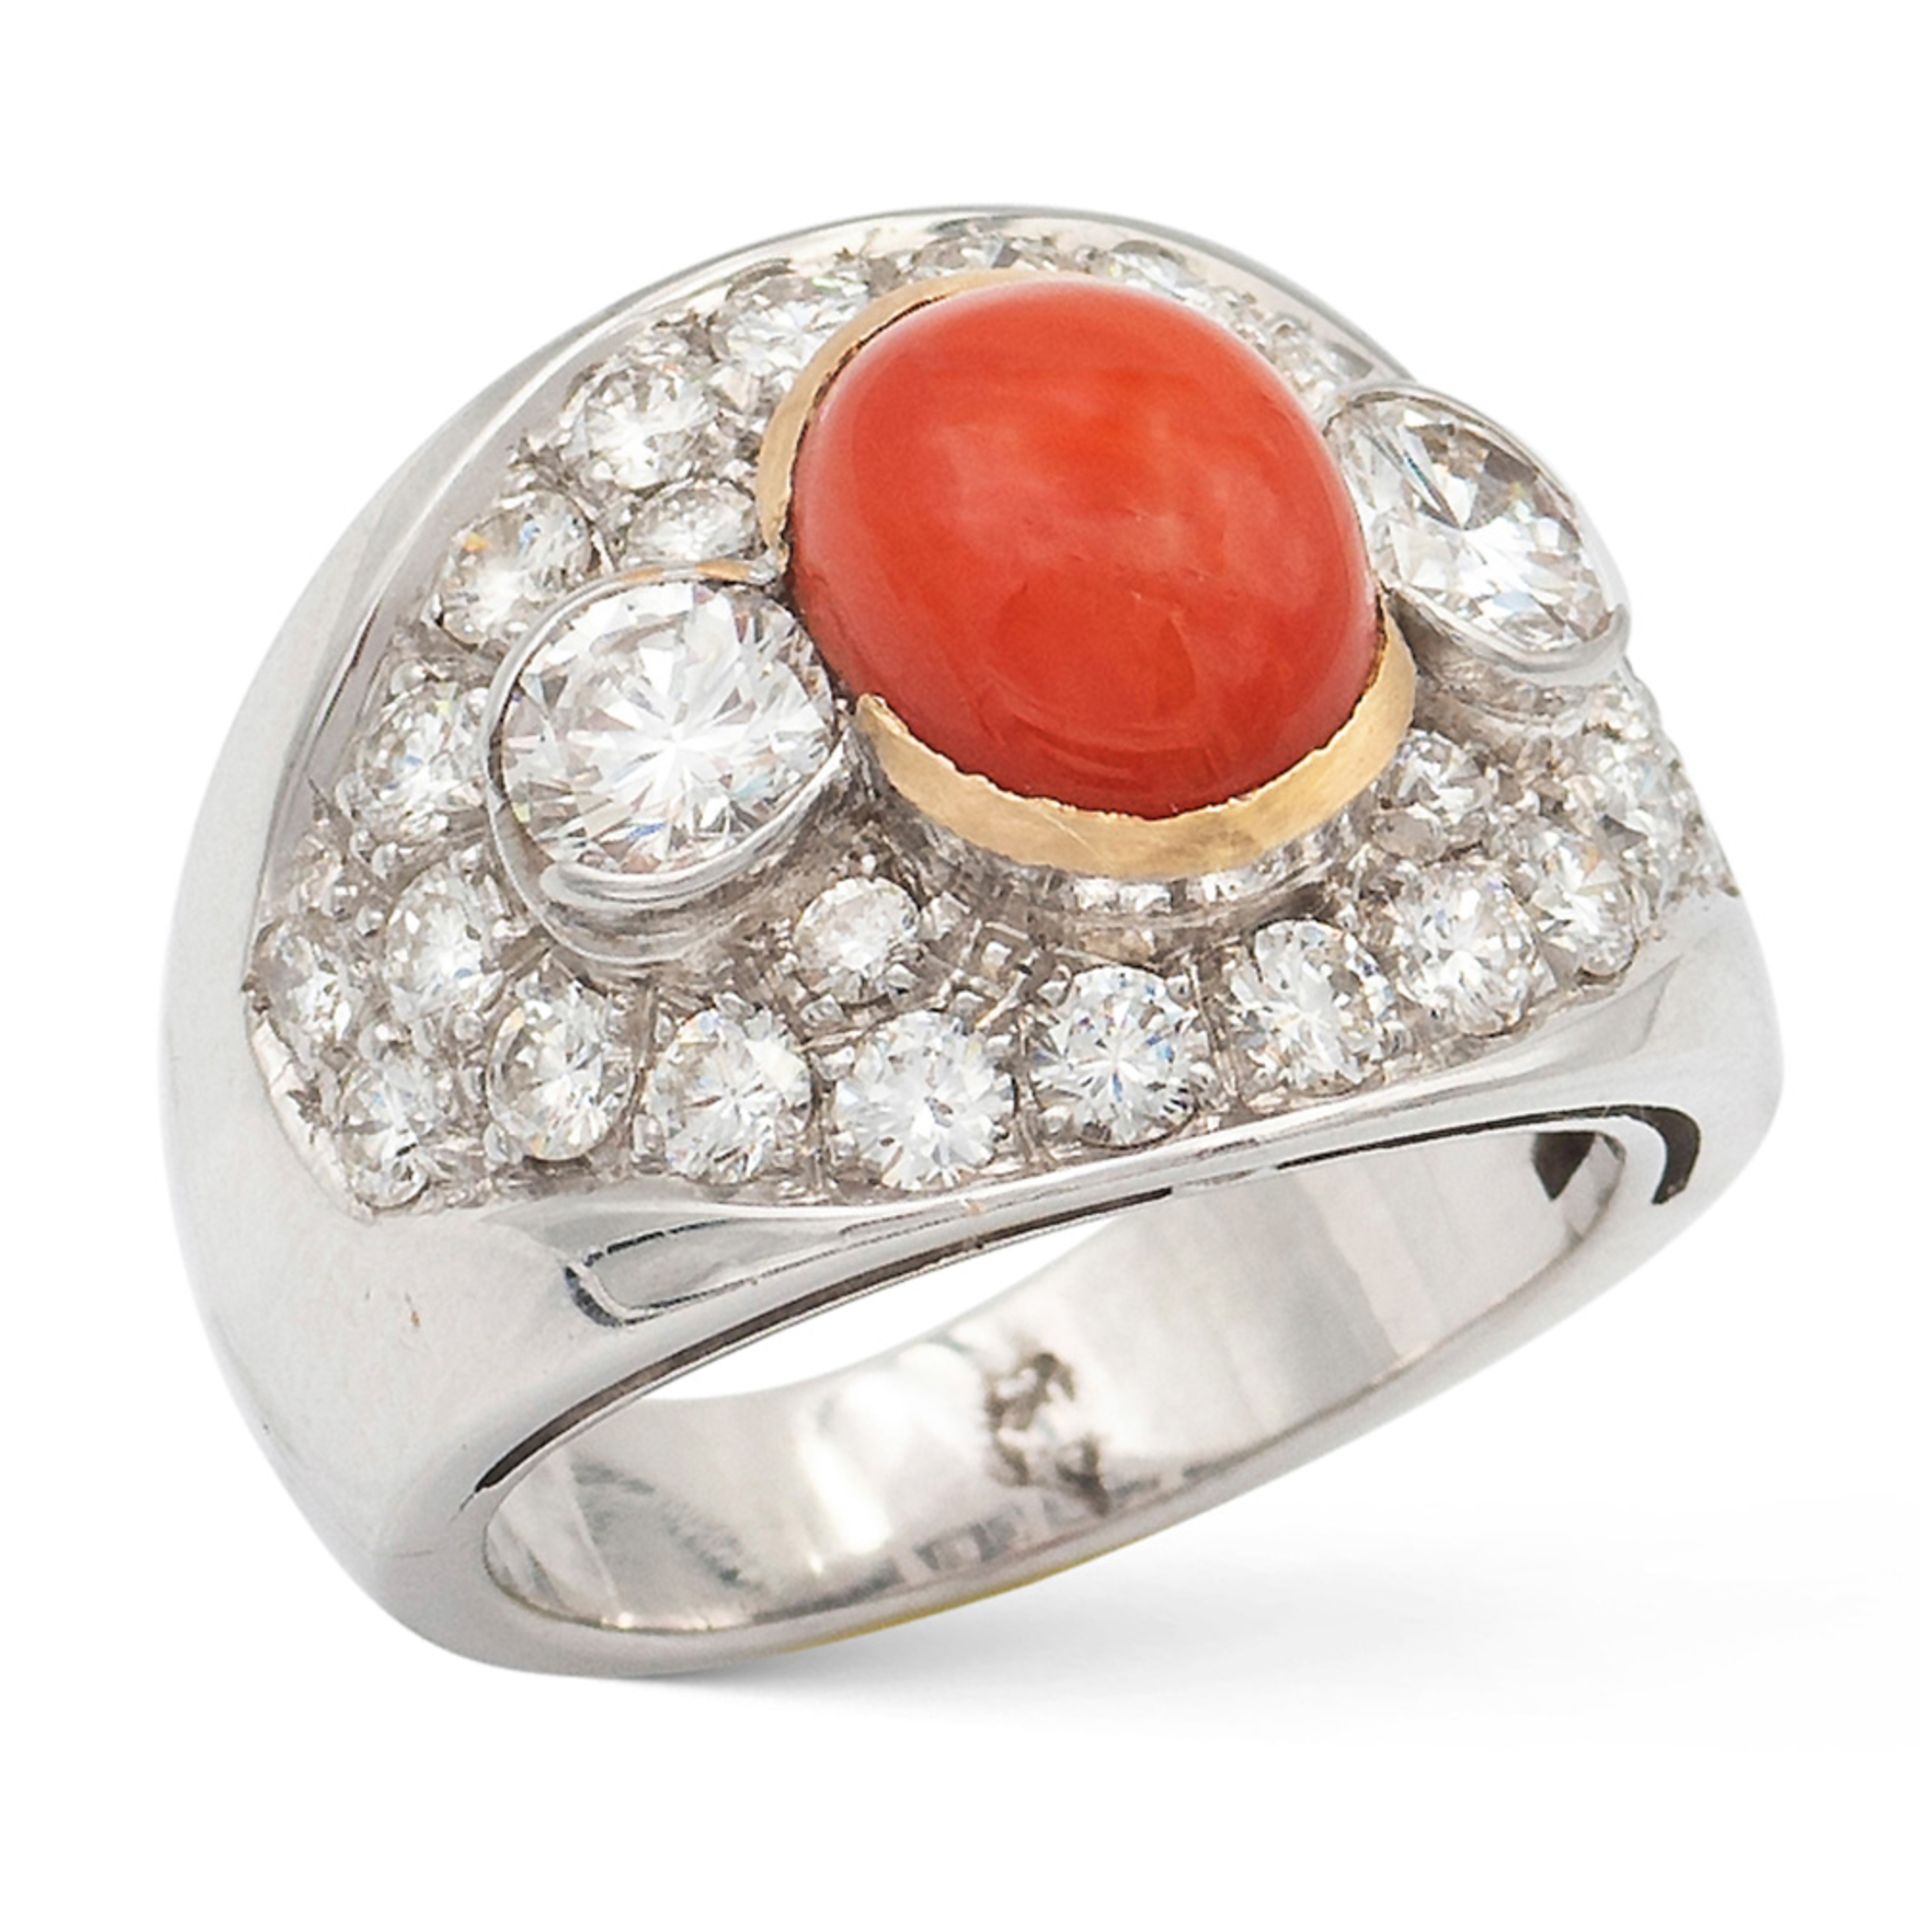 18kt white and yellow gold, coral and diamond ring weight 14,9 gr.